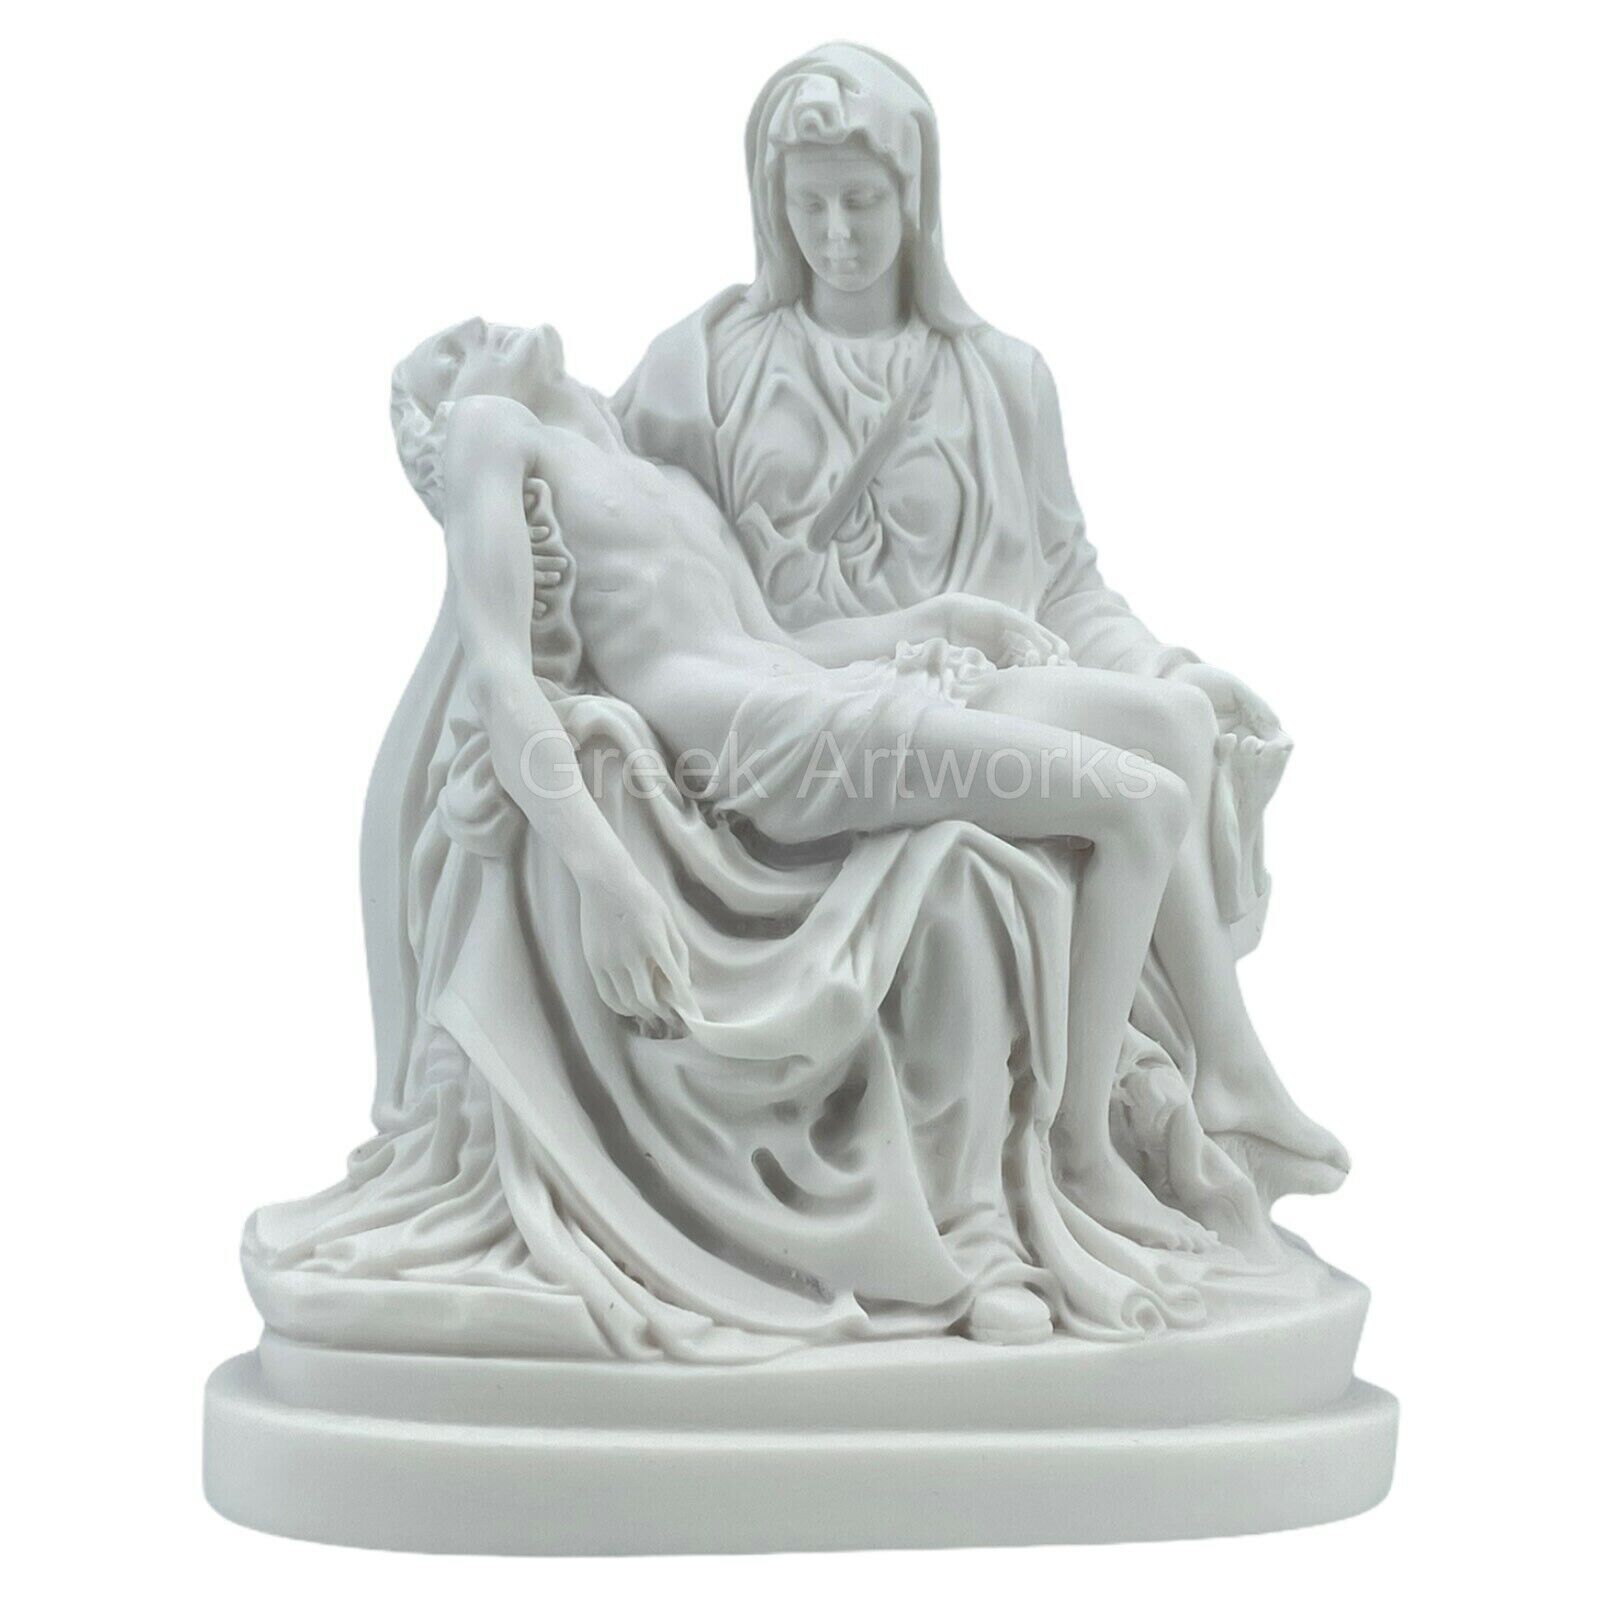 The Pieta by Michelangelo Jesus Christ and Mother Mary Madonna Sculpture Statue